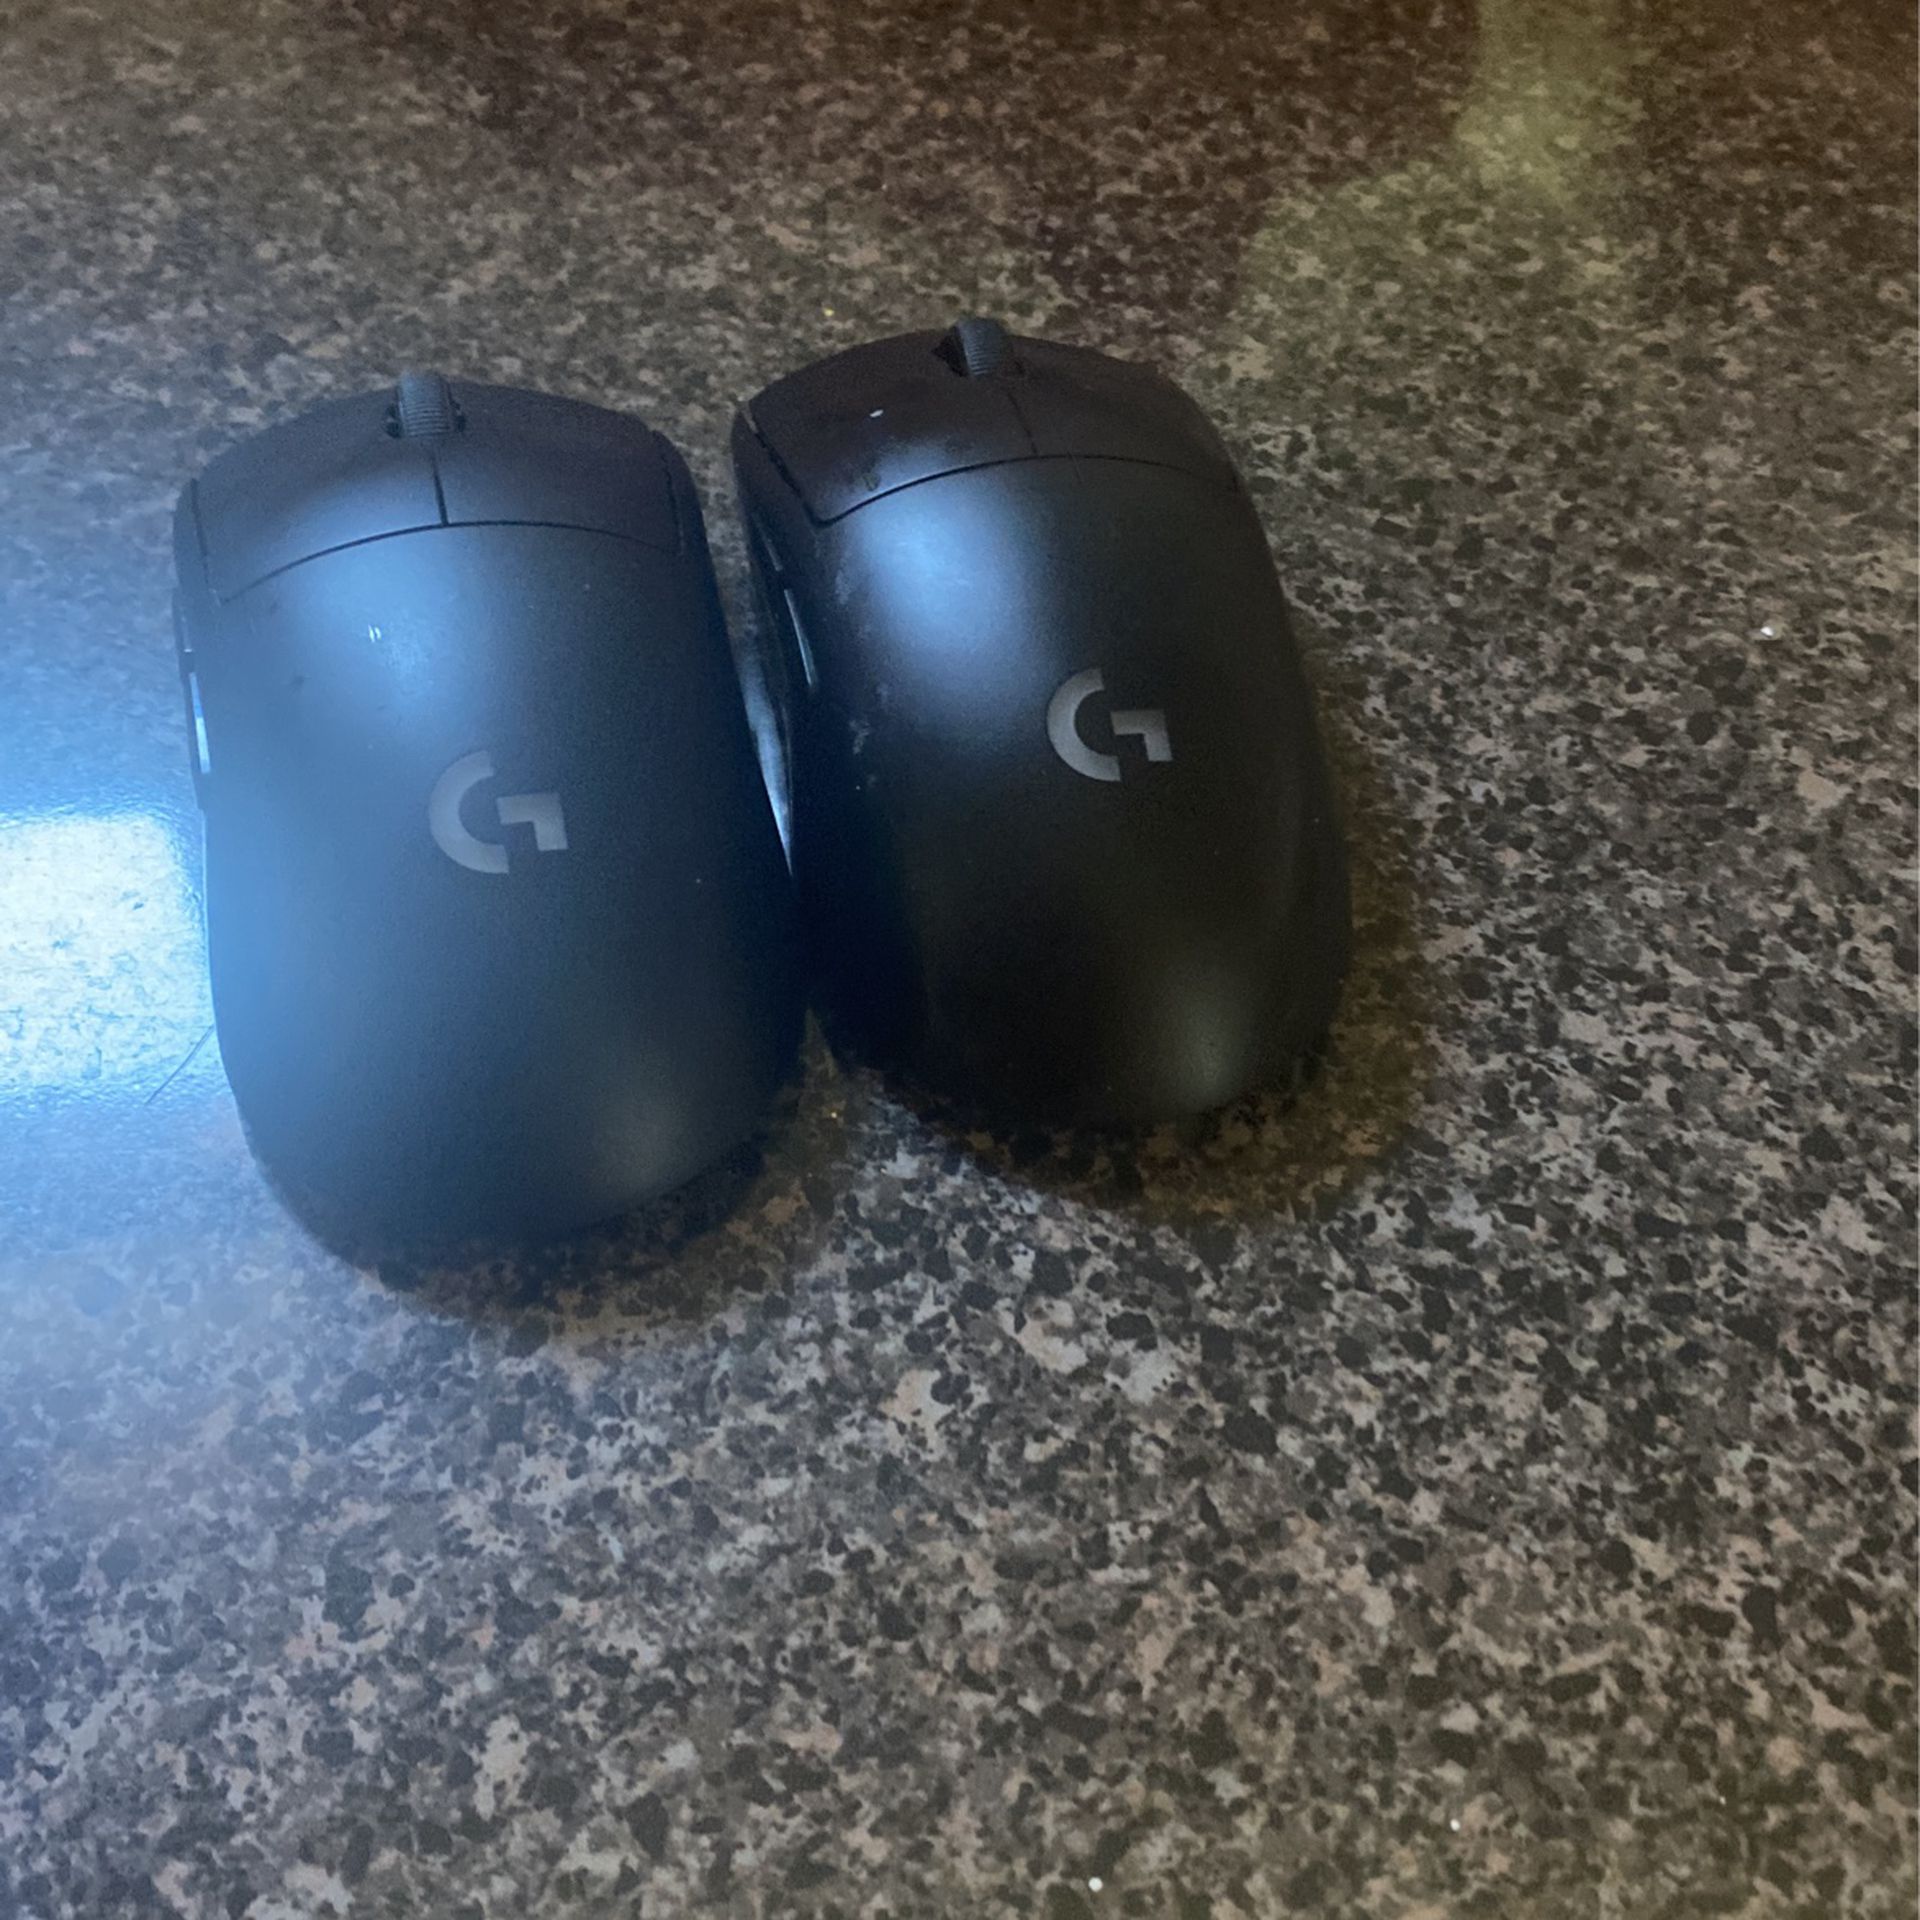 Selling Two Wireless Logitech Pro Mouses